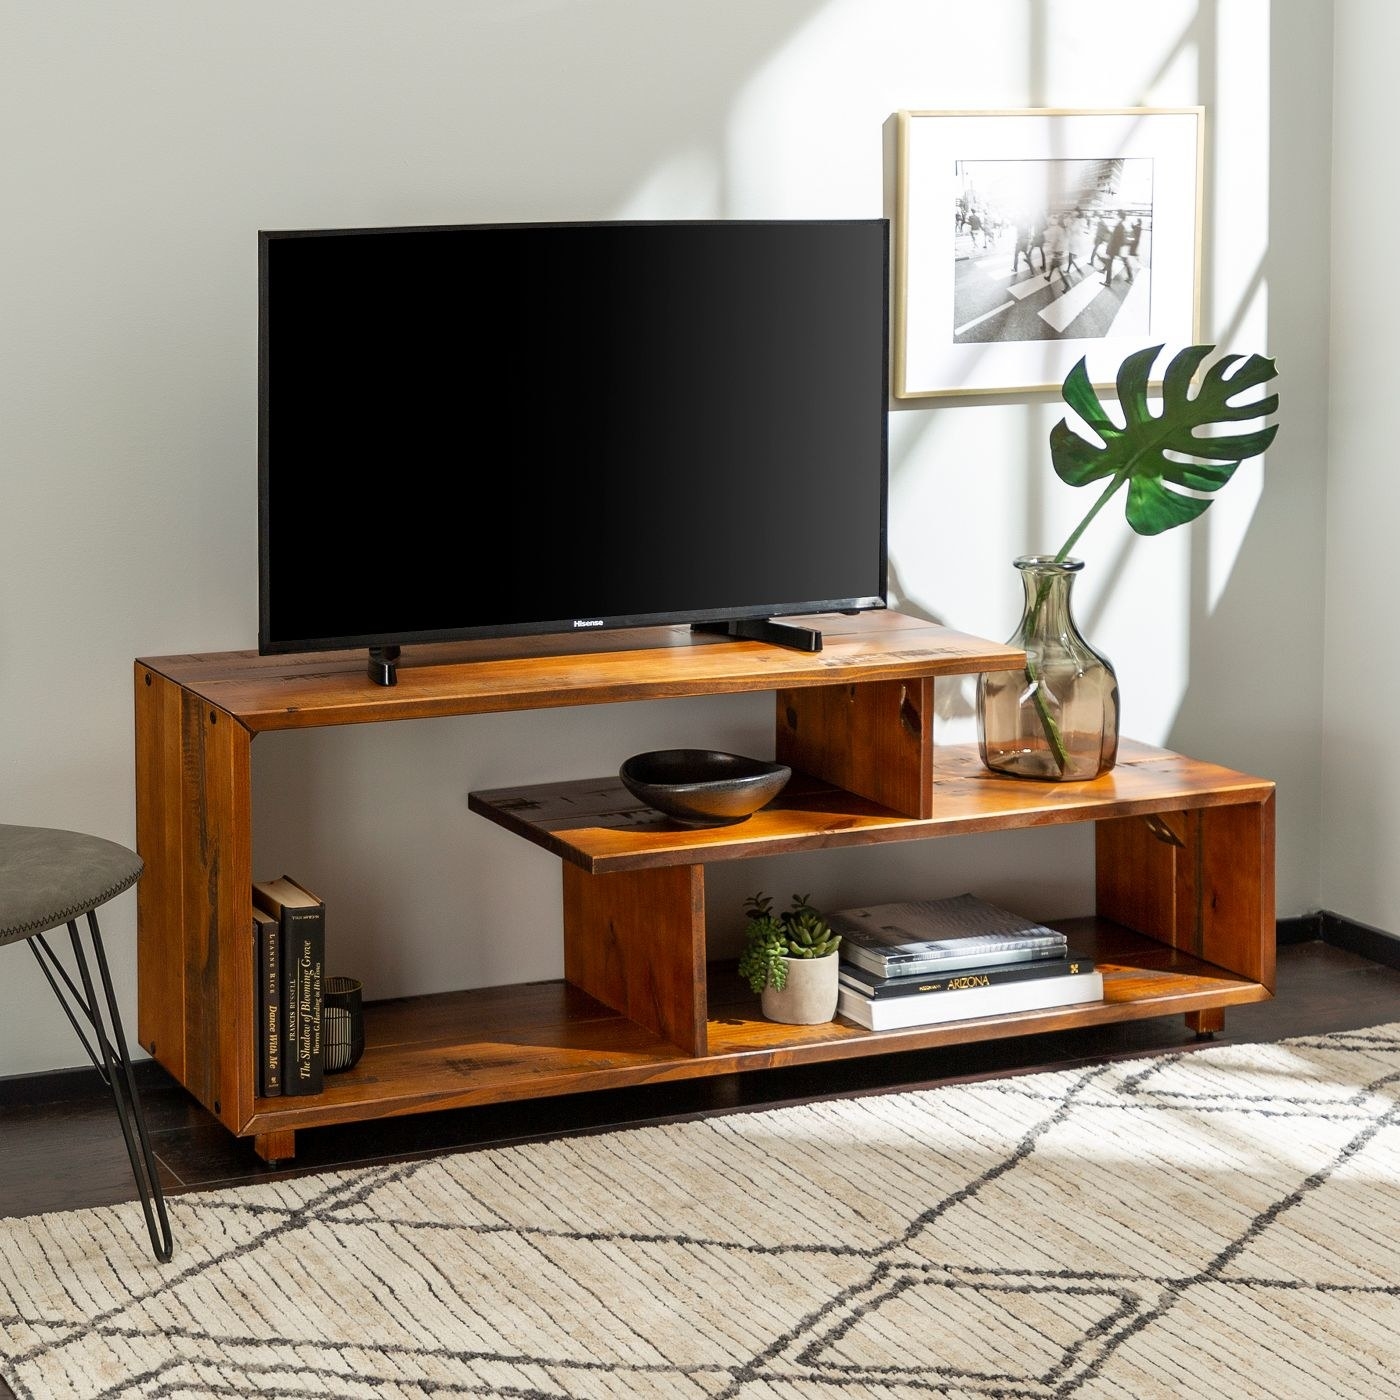 TV stand with a TV on it and items stored inside.